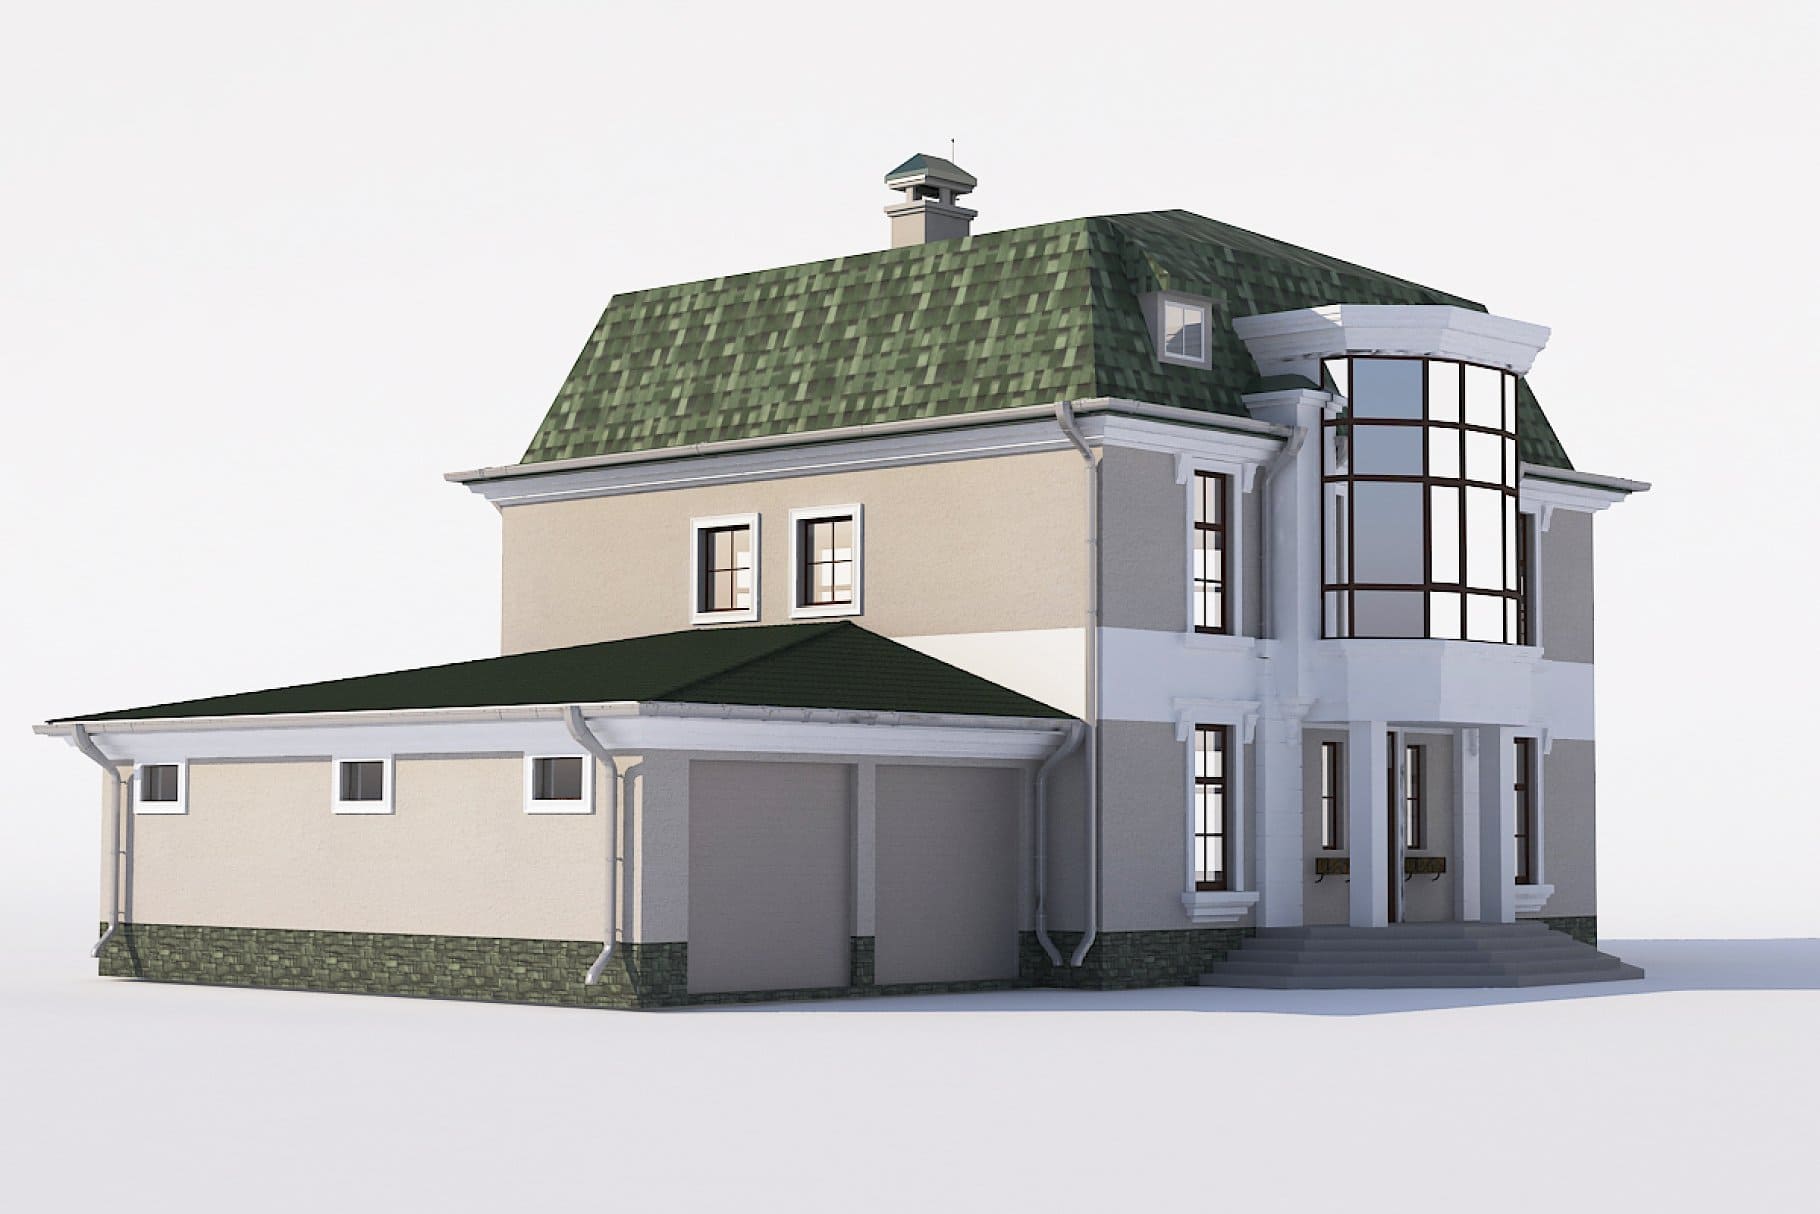 A two-story house with a green roof.